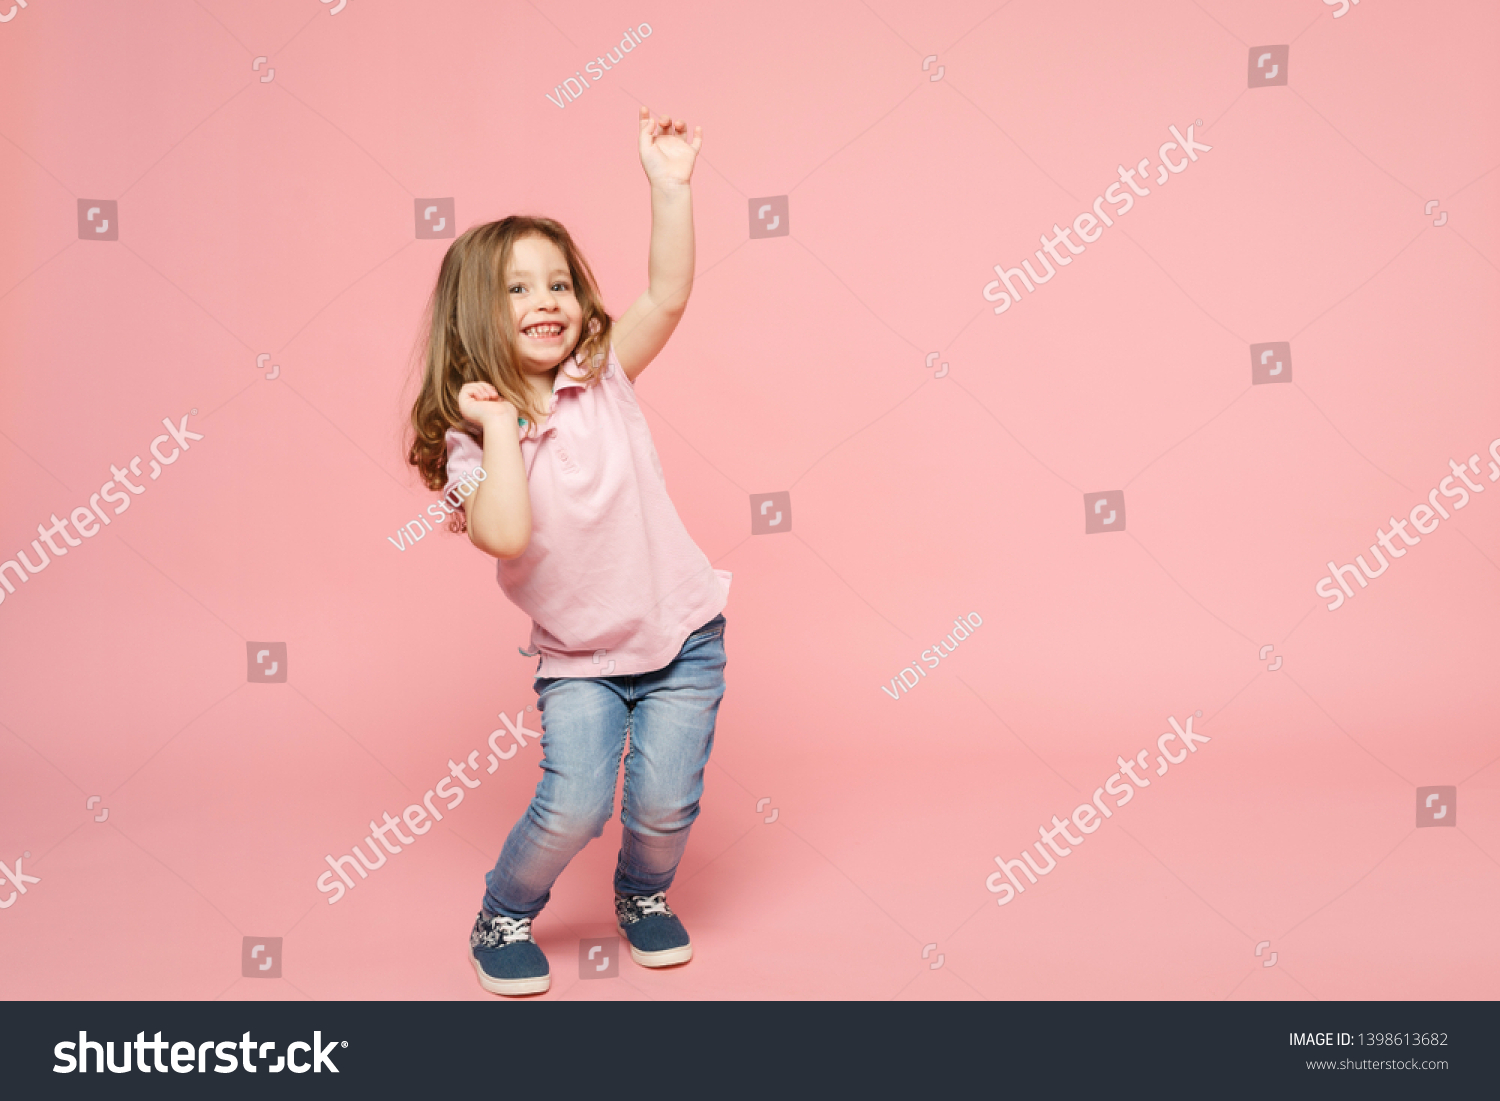 Little cute child kid baby girl 3-4 years old wearing light clothes dancing isolated on pastel pink wall background, children studio portrait. Mother's Day, love family, parenthood childhood concept #1398613682